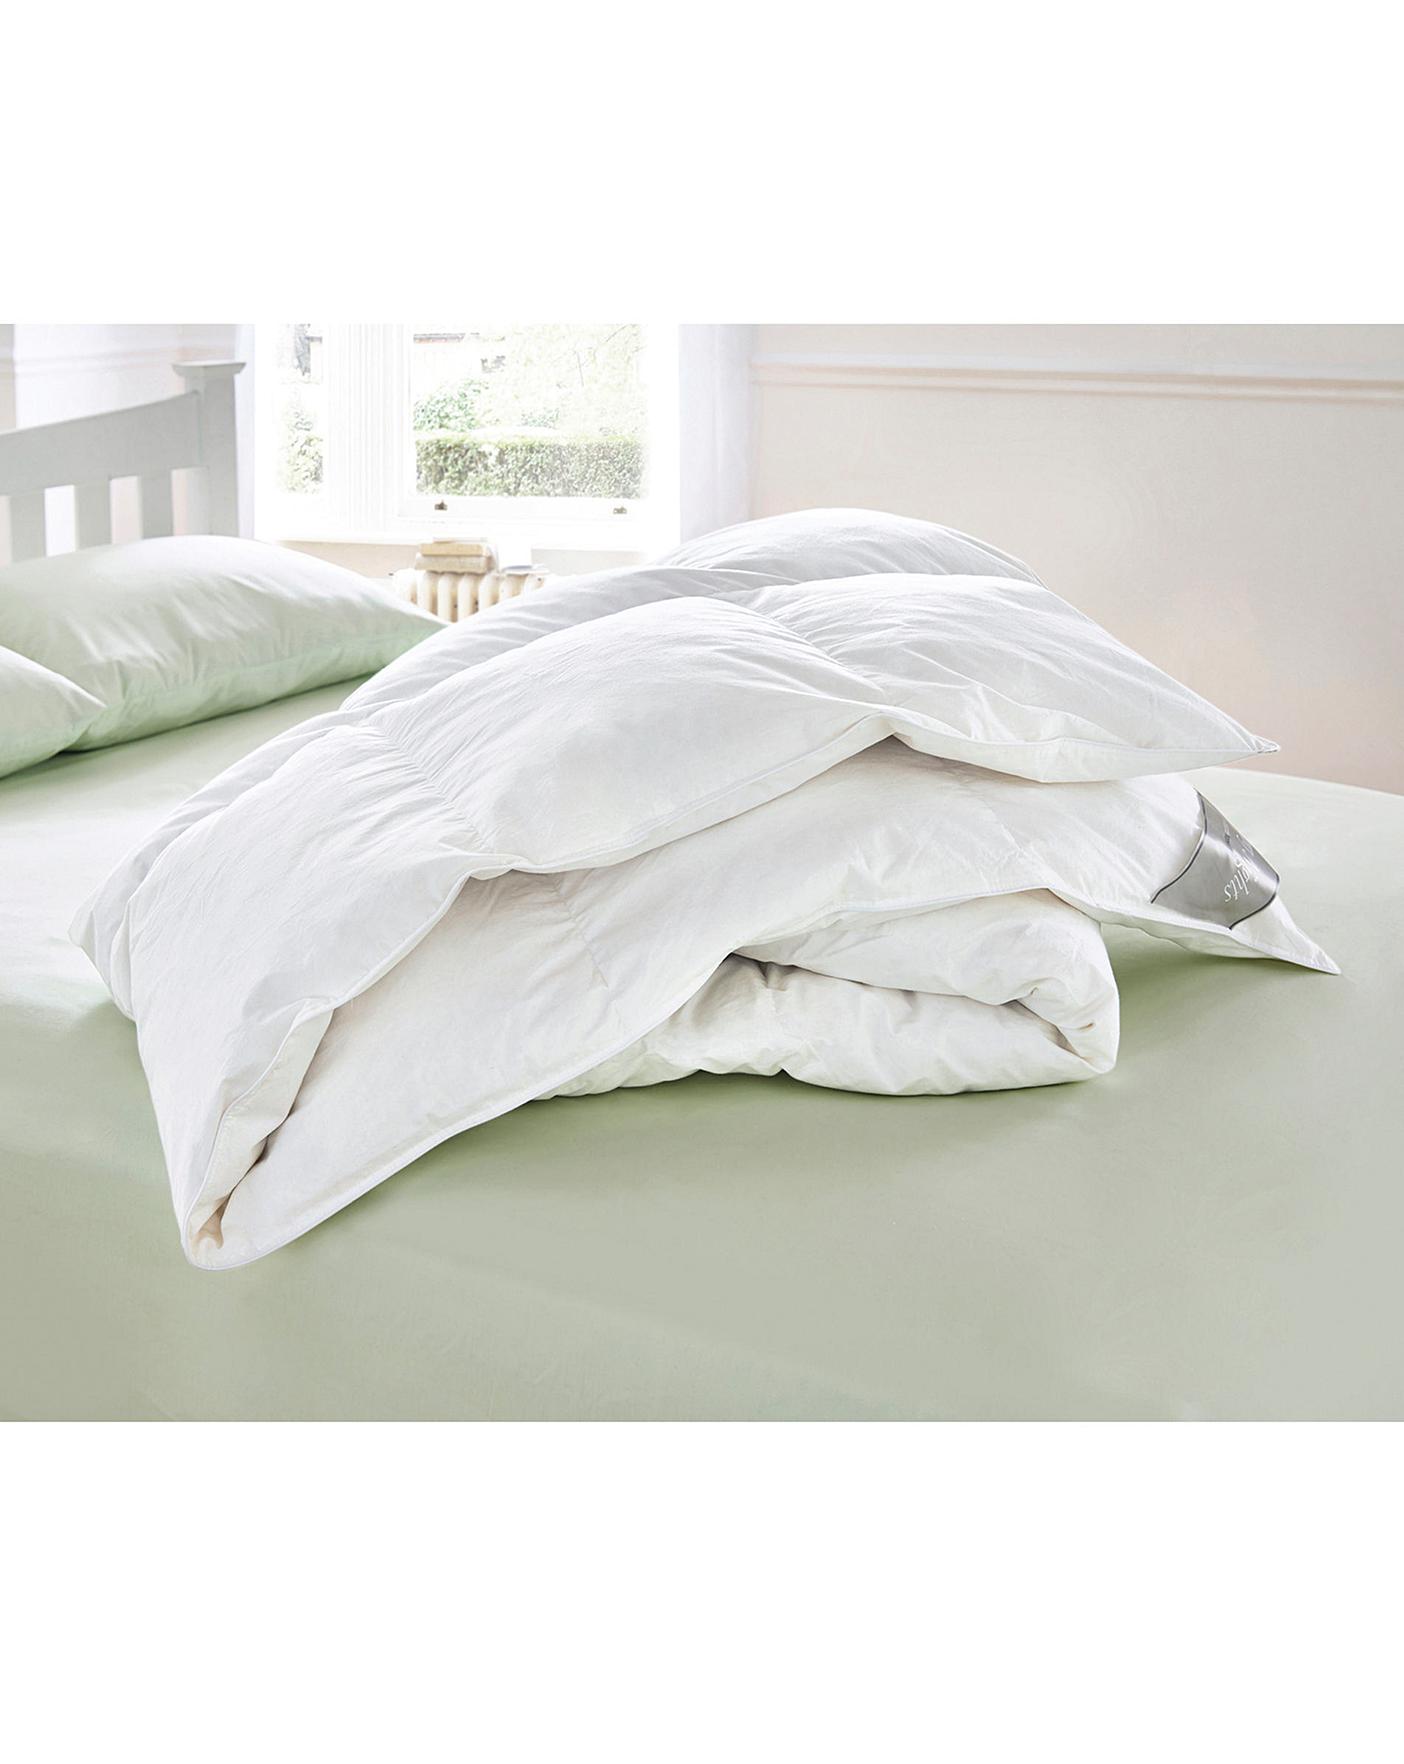 Goose Feather Down Duvet 4 5 Tog House Of Bath